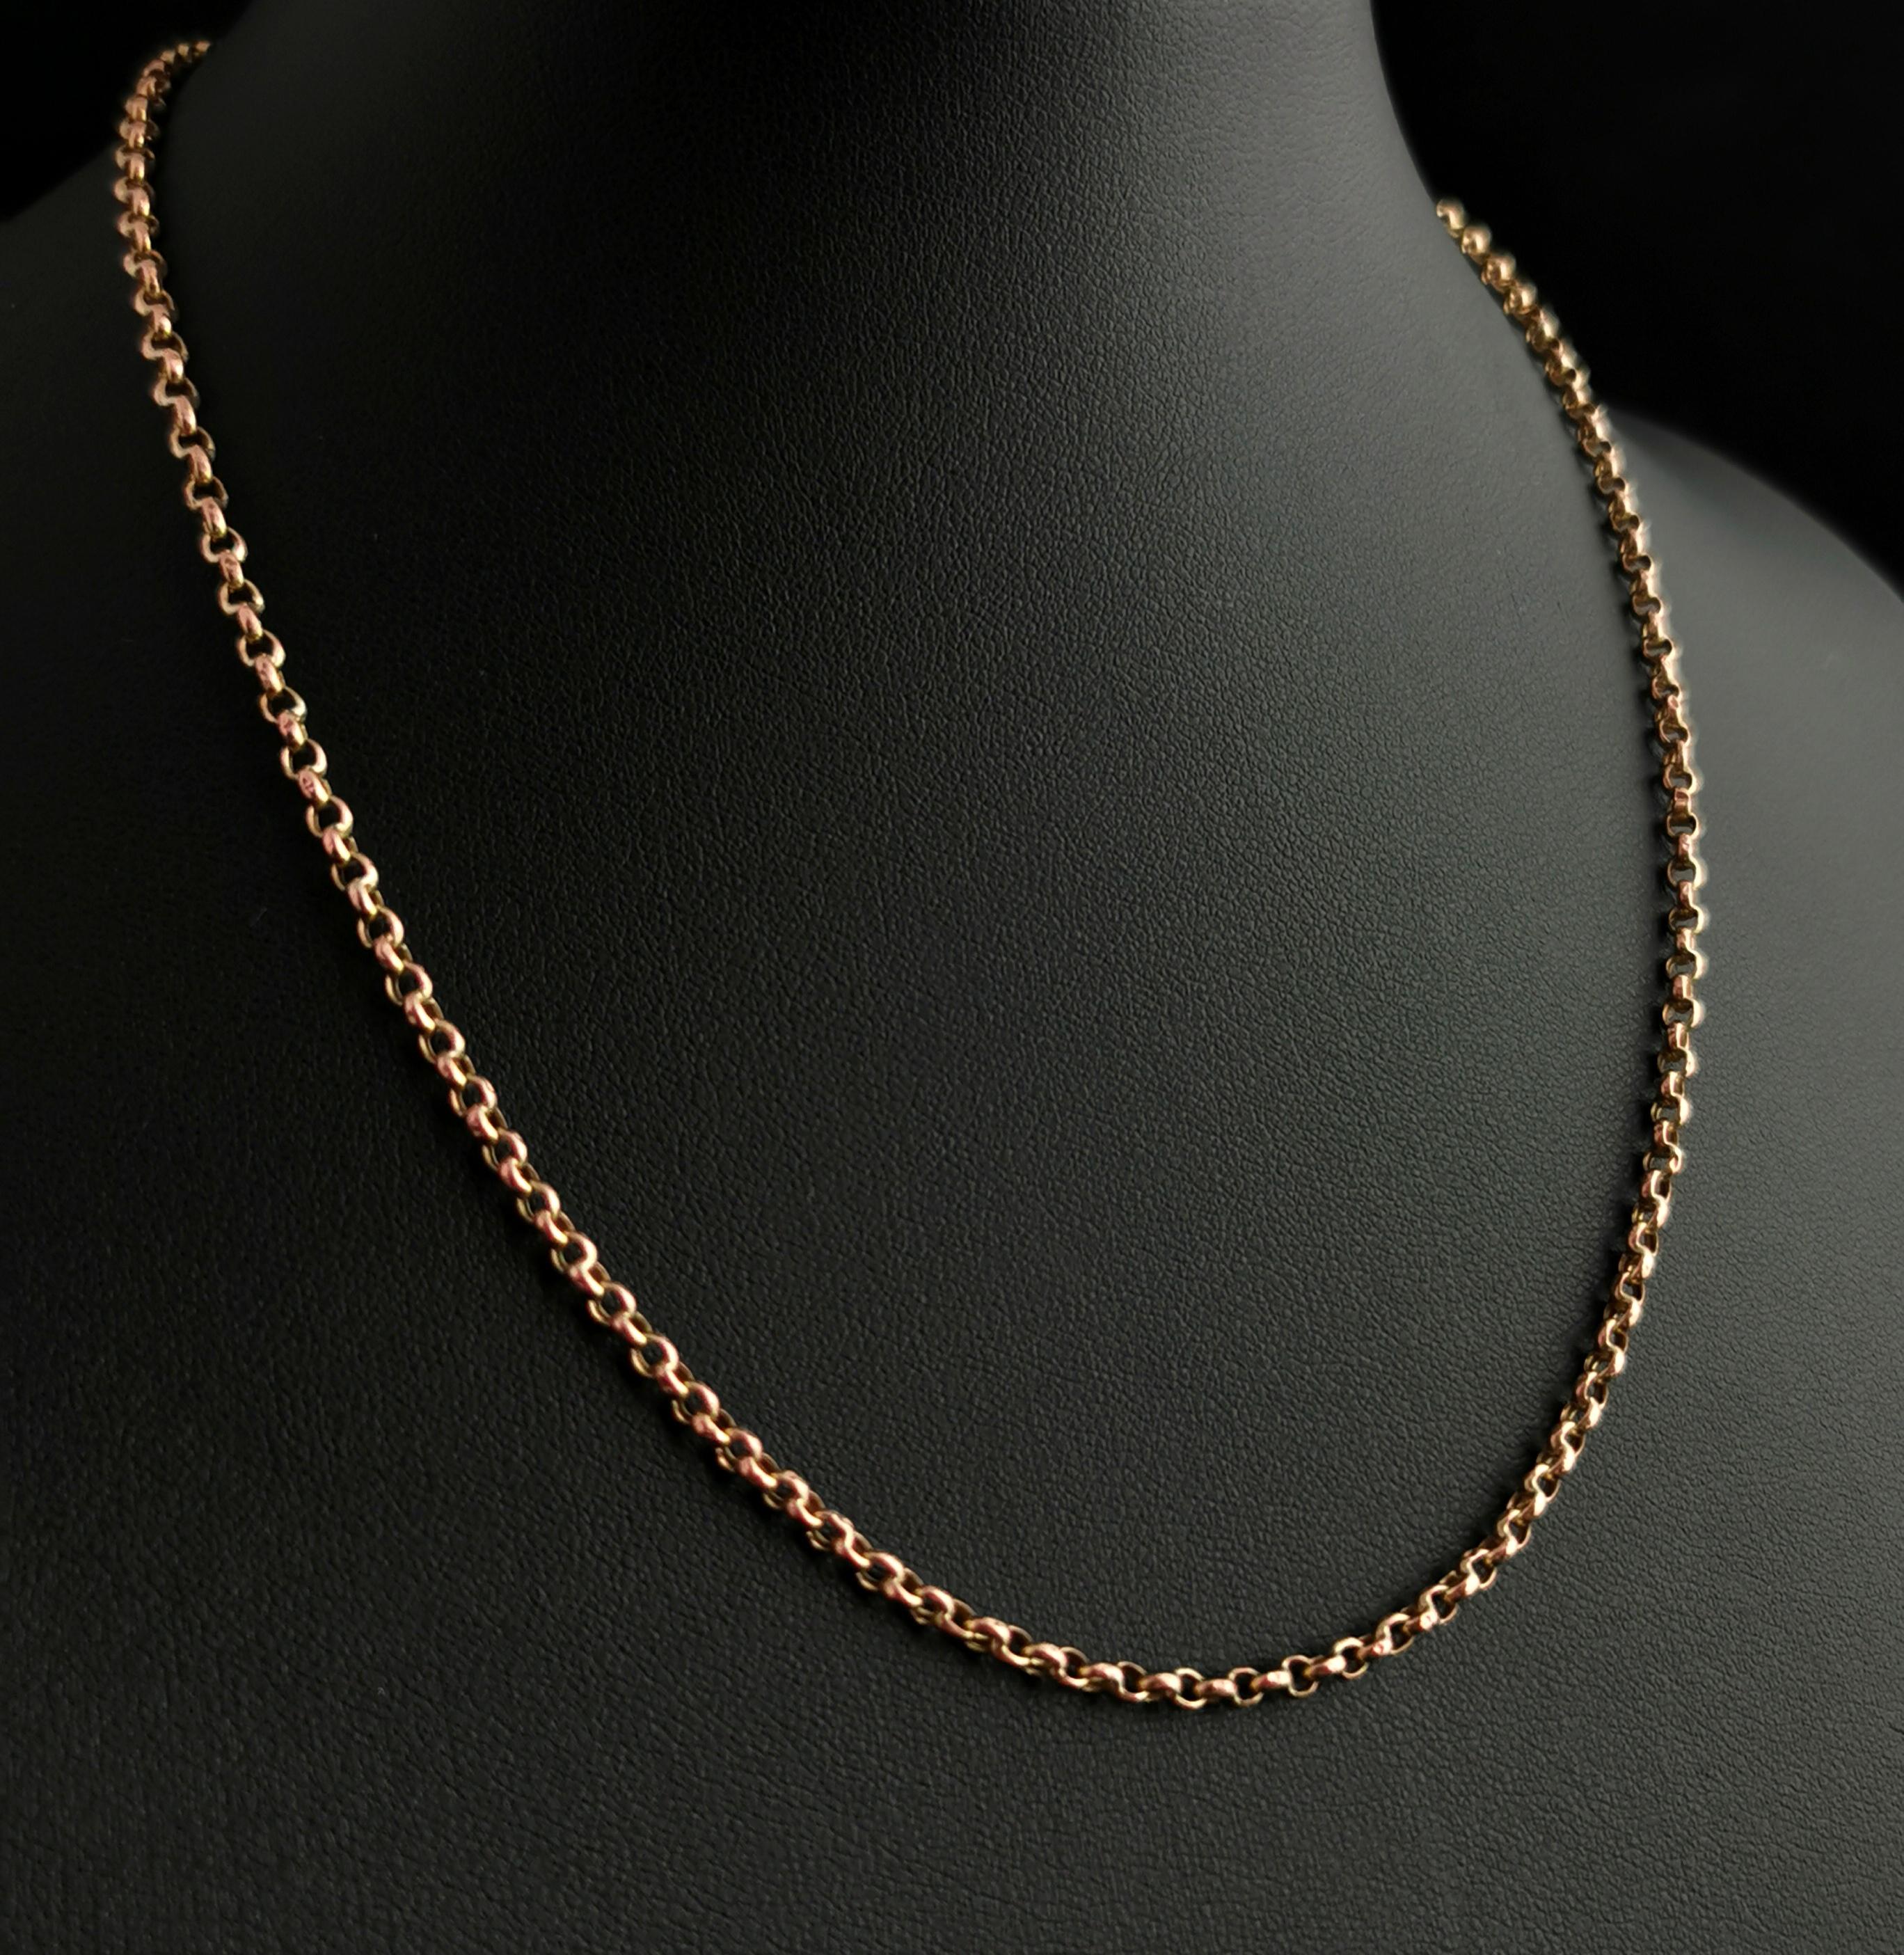 Antique 9k yellow gold rolo link chain necklace, Edwardian era  5